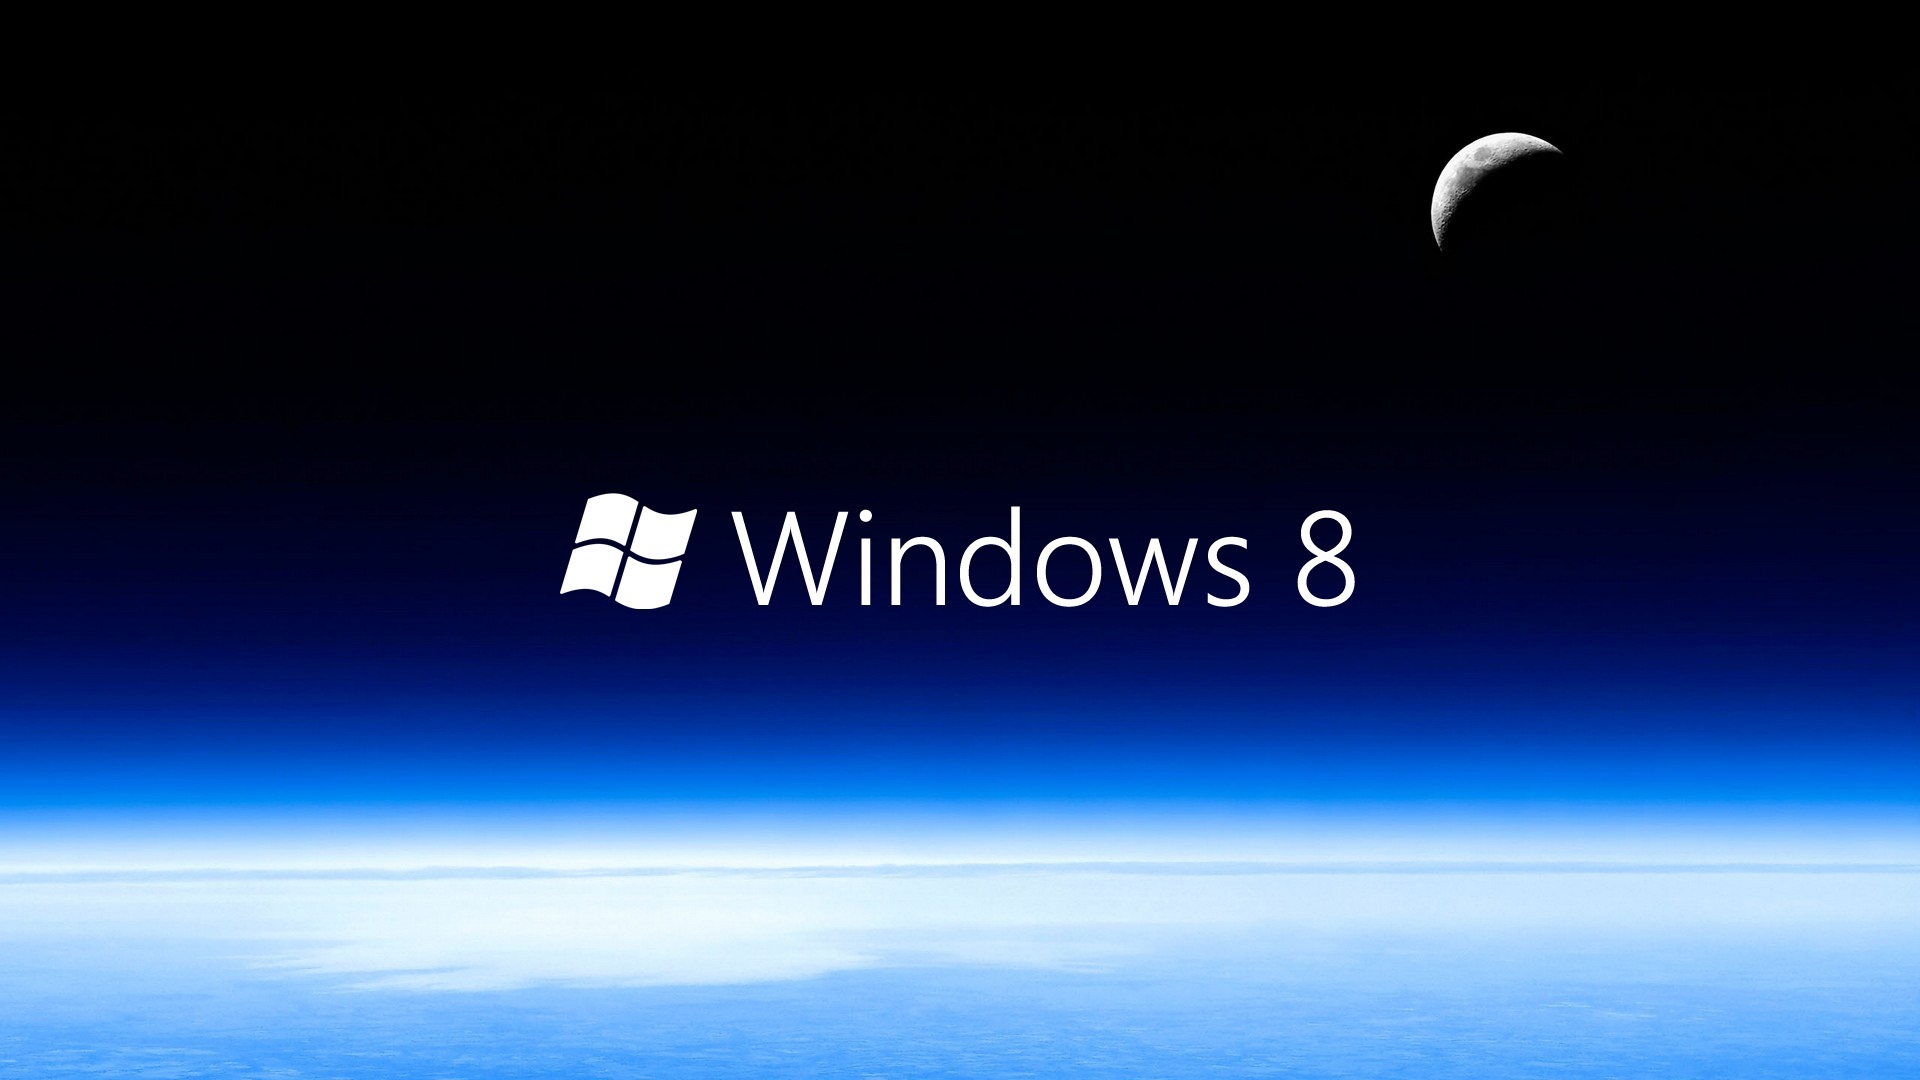 Related Wallpaper For Windows Moon